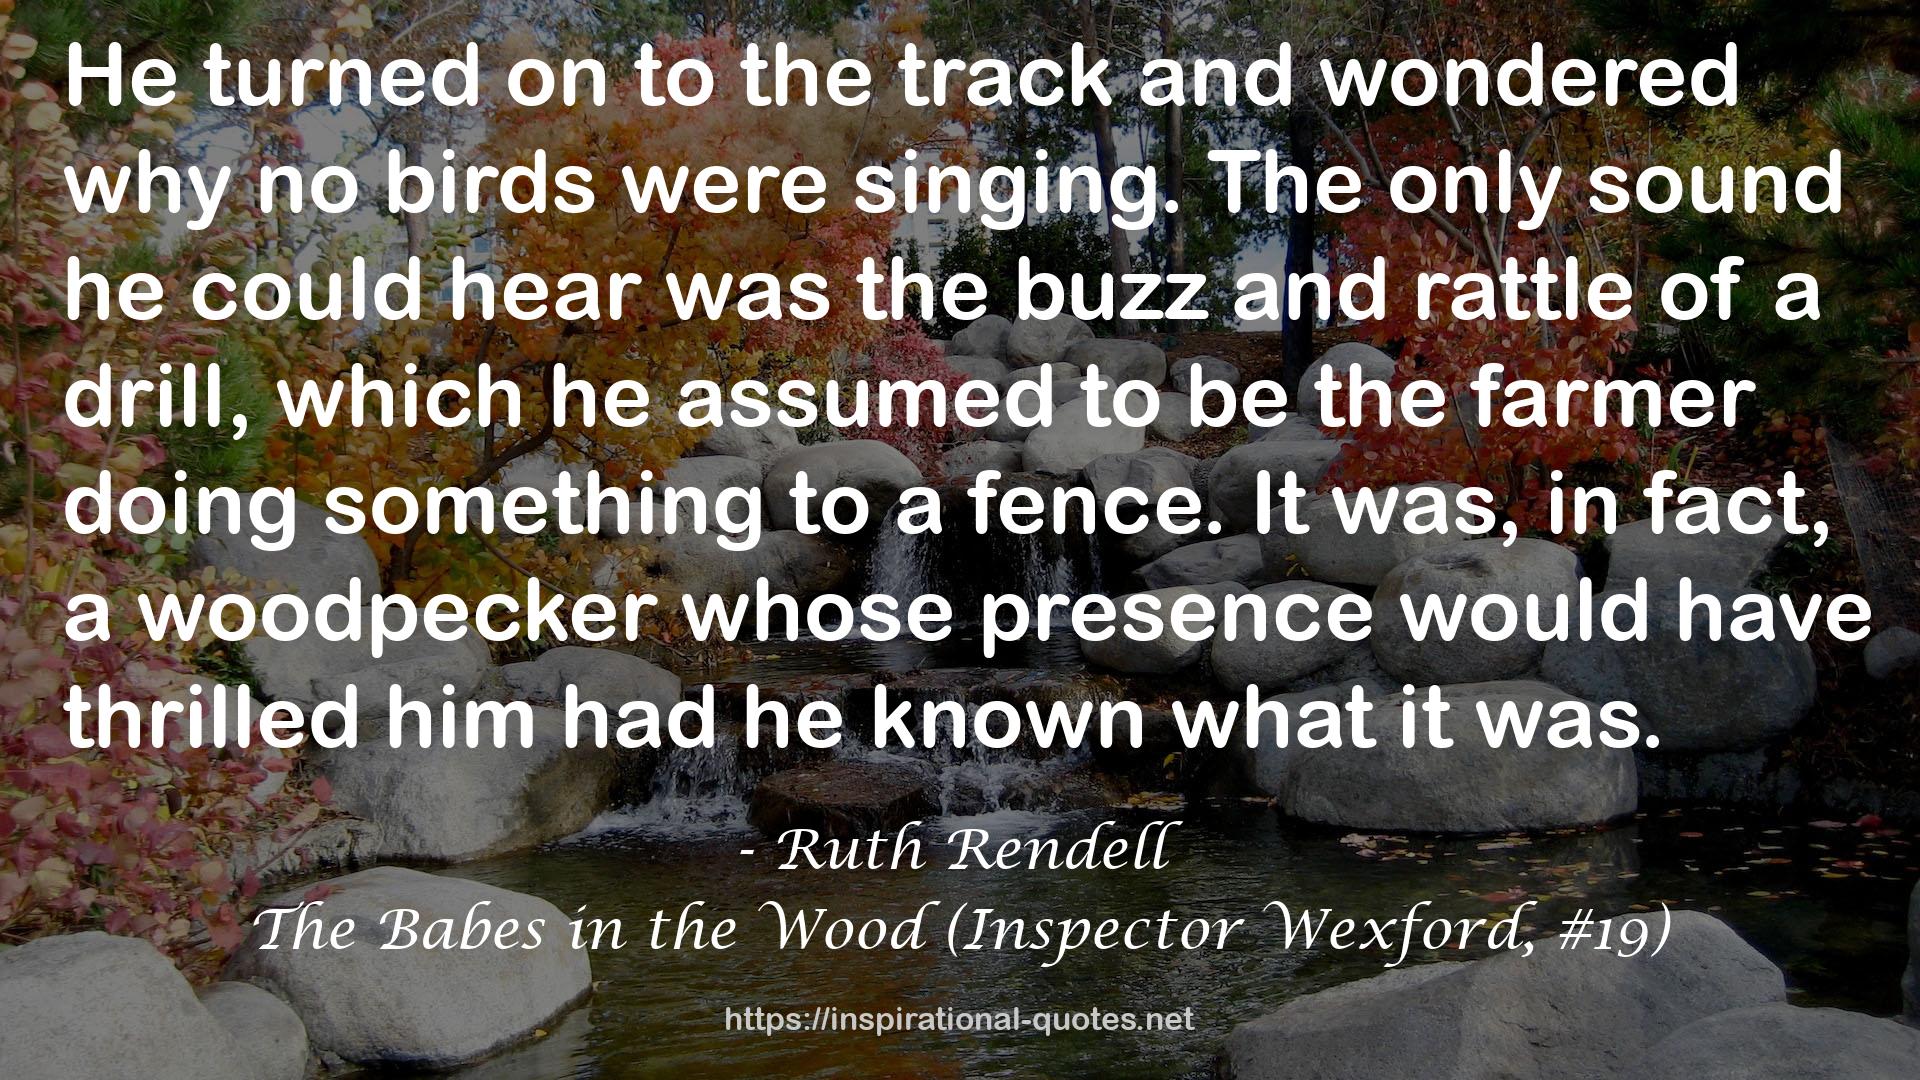 The Babes in the Wood (Inspector Wexford, #19) QUOTES